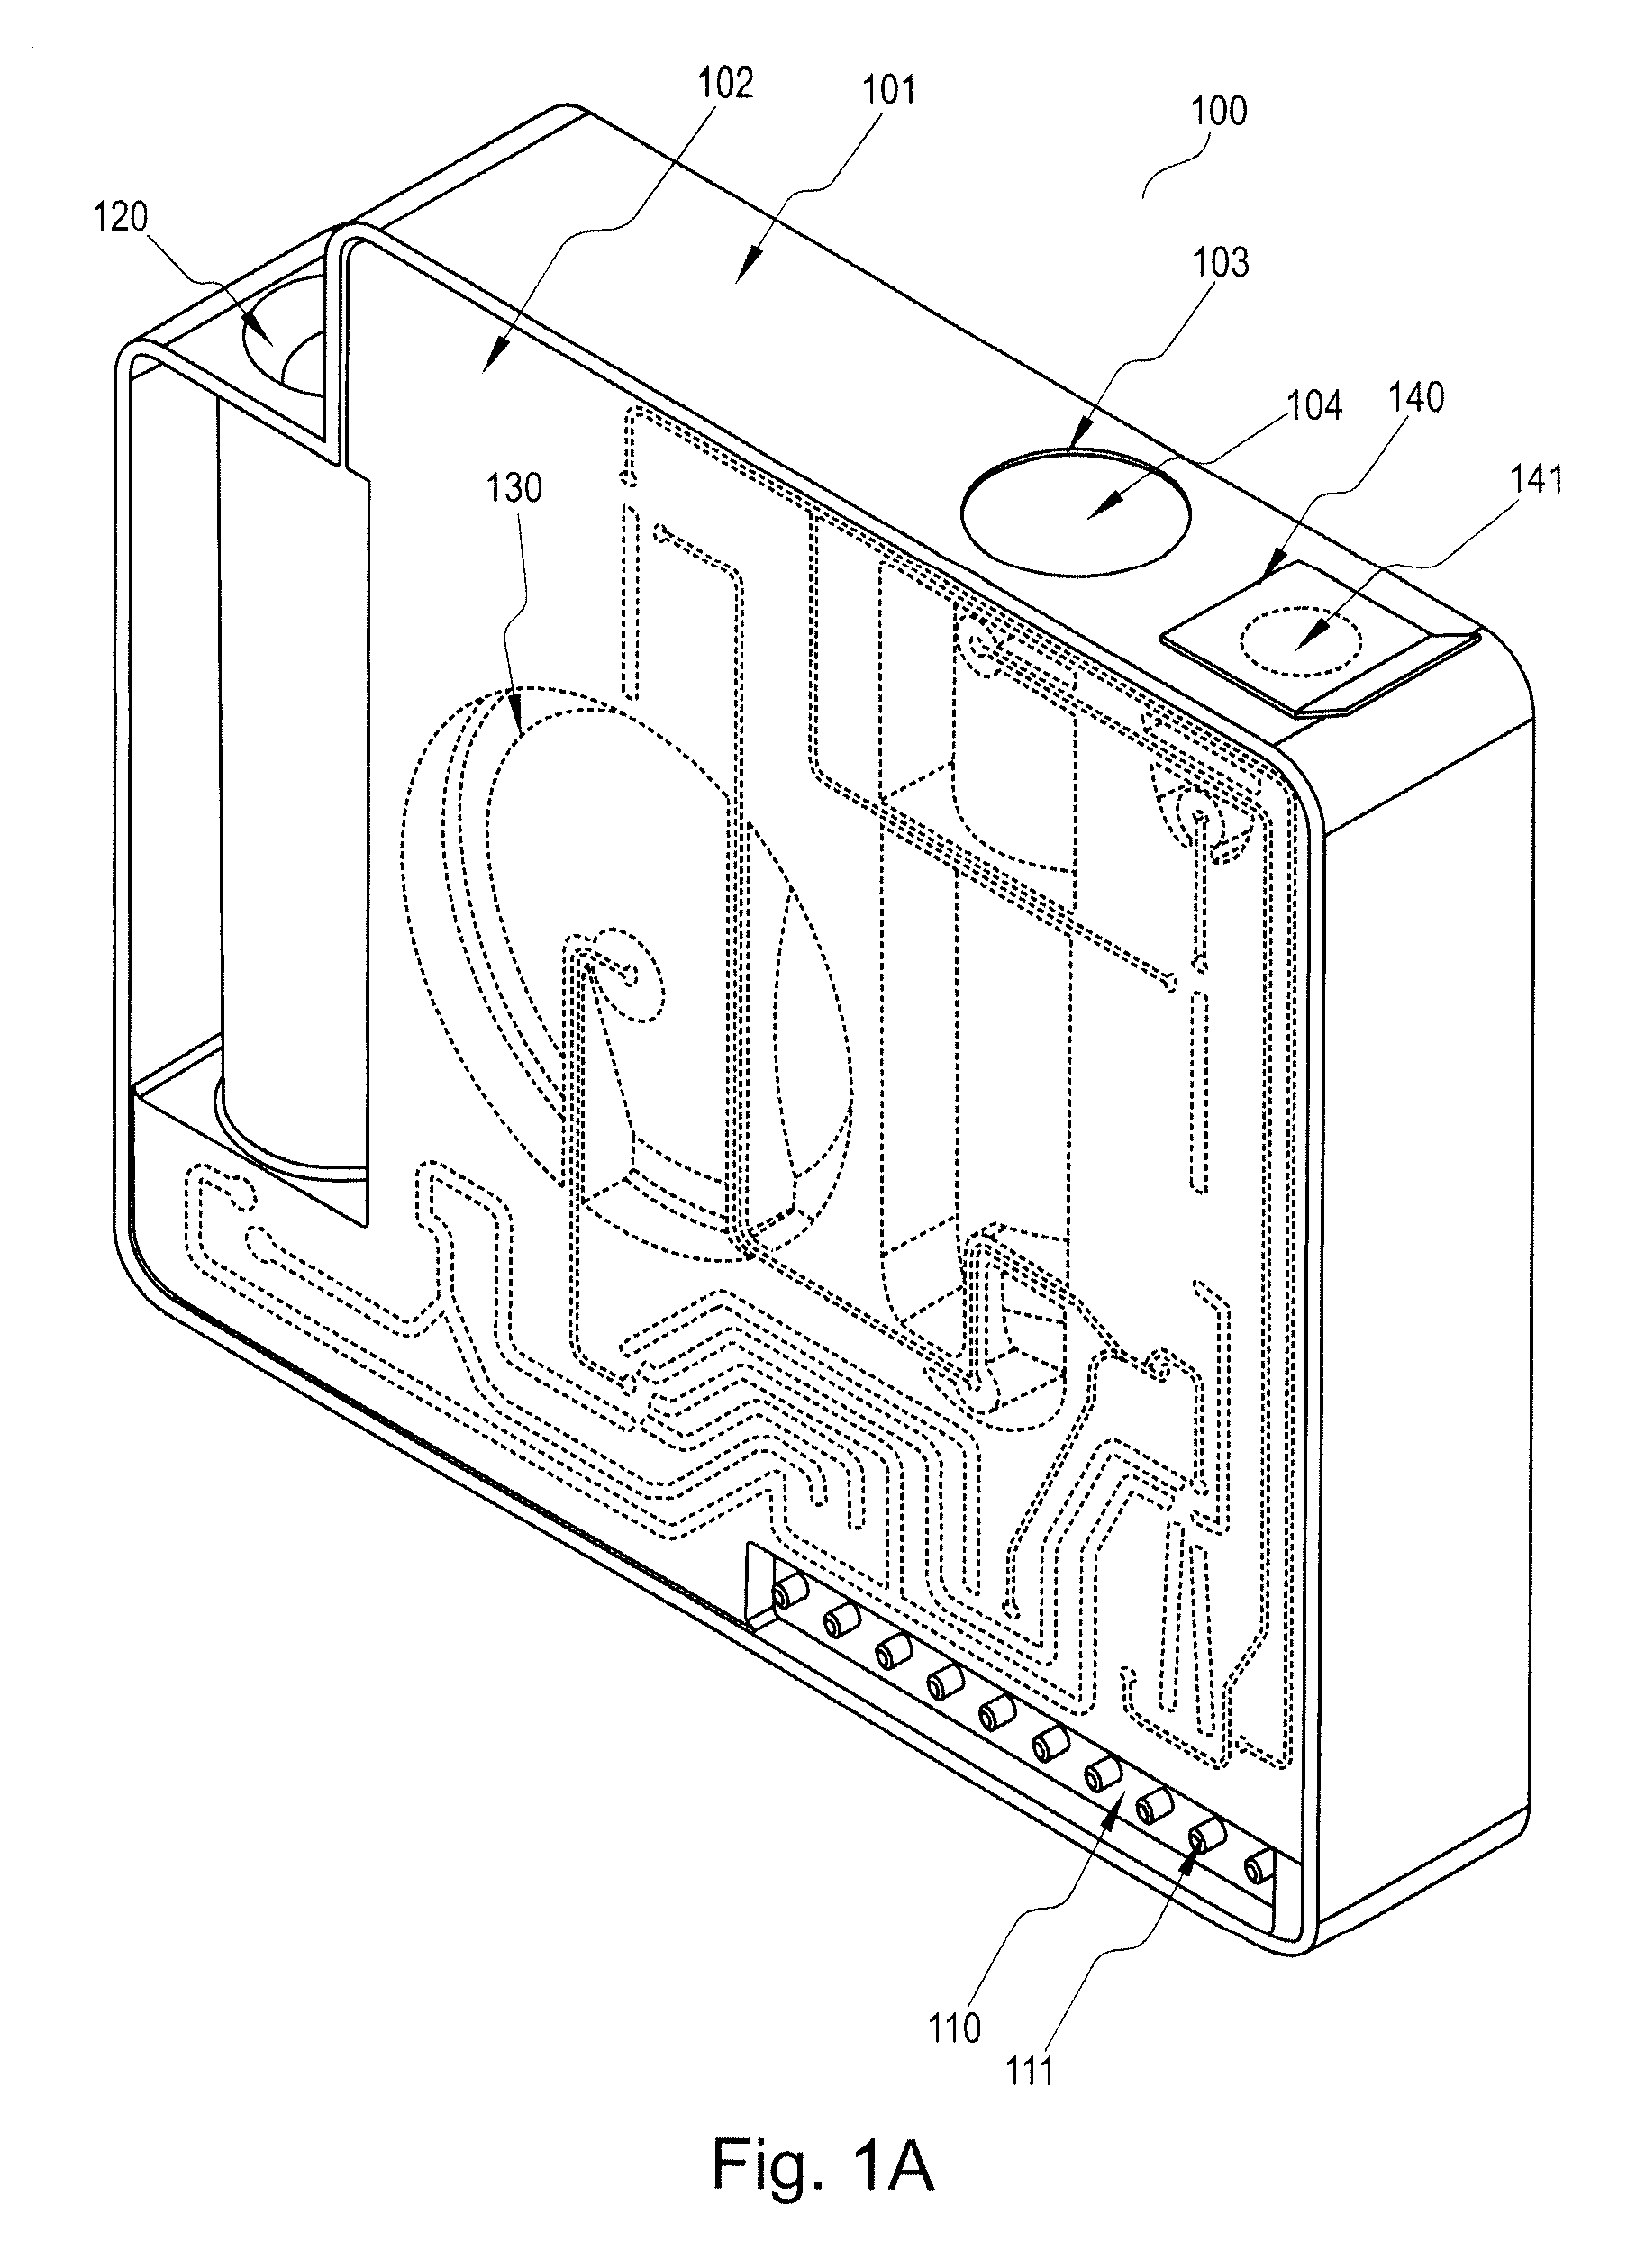 System for isolating biomolecules from a sample